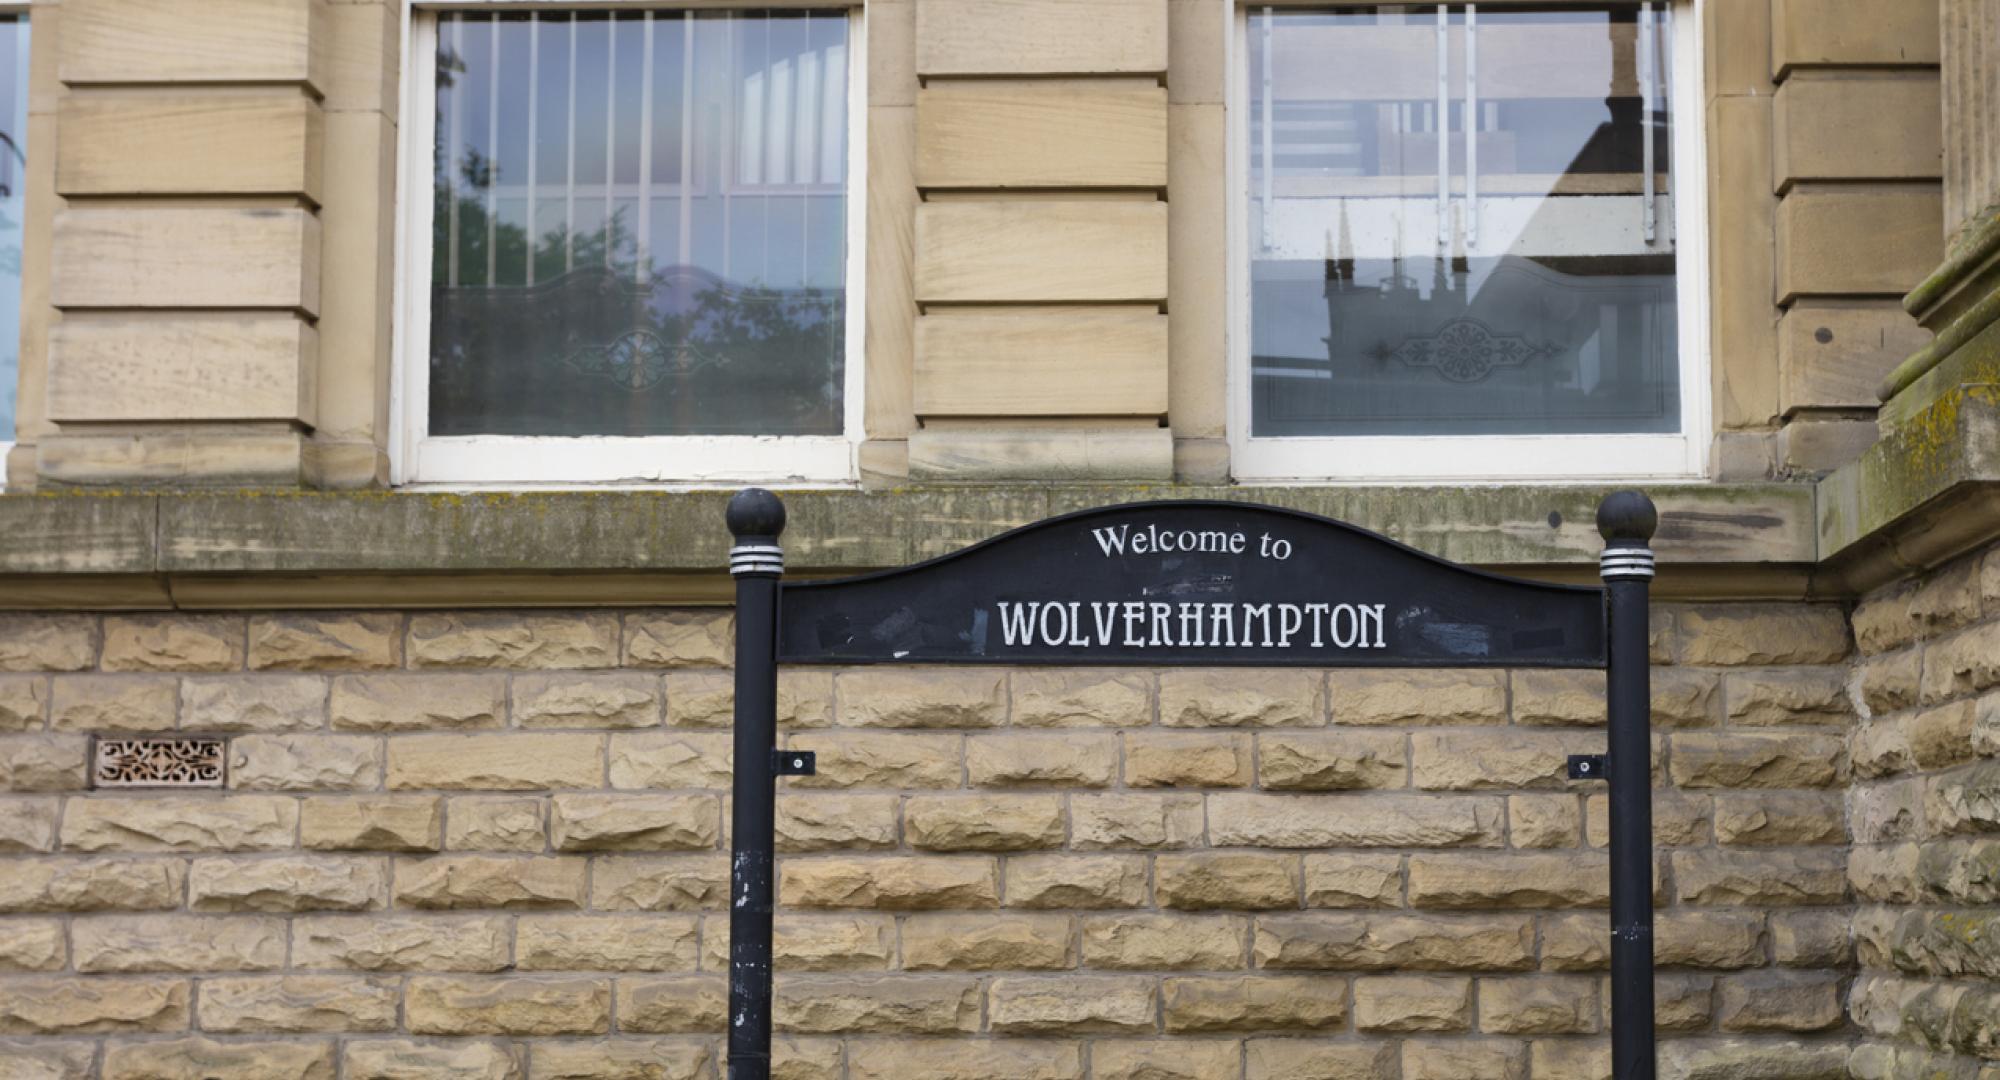 Sign welcoming people to Wolverhampton